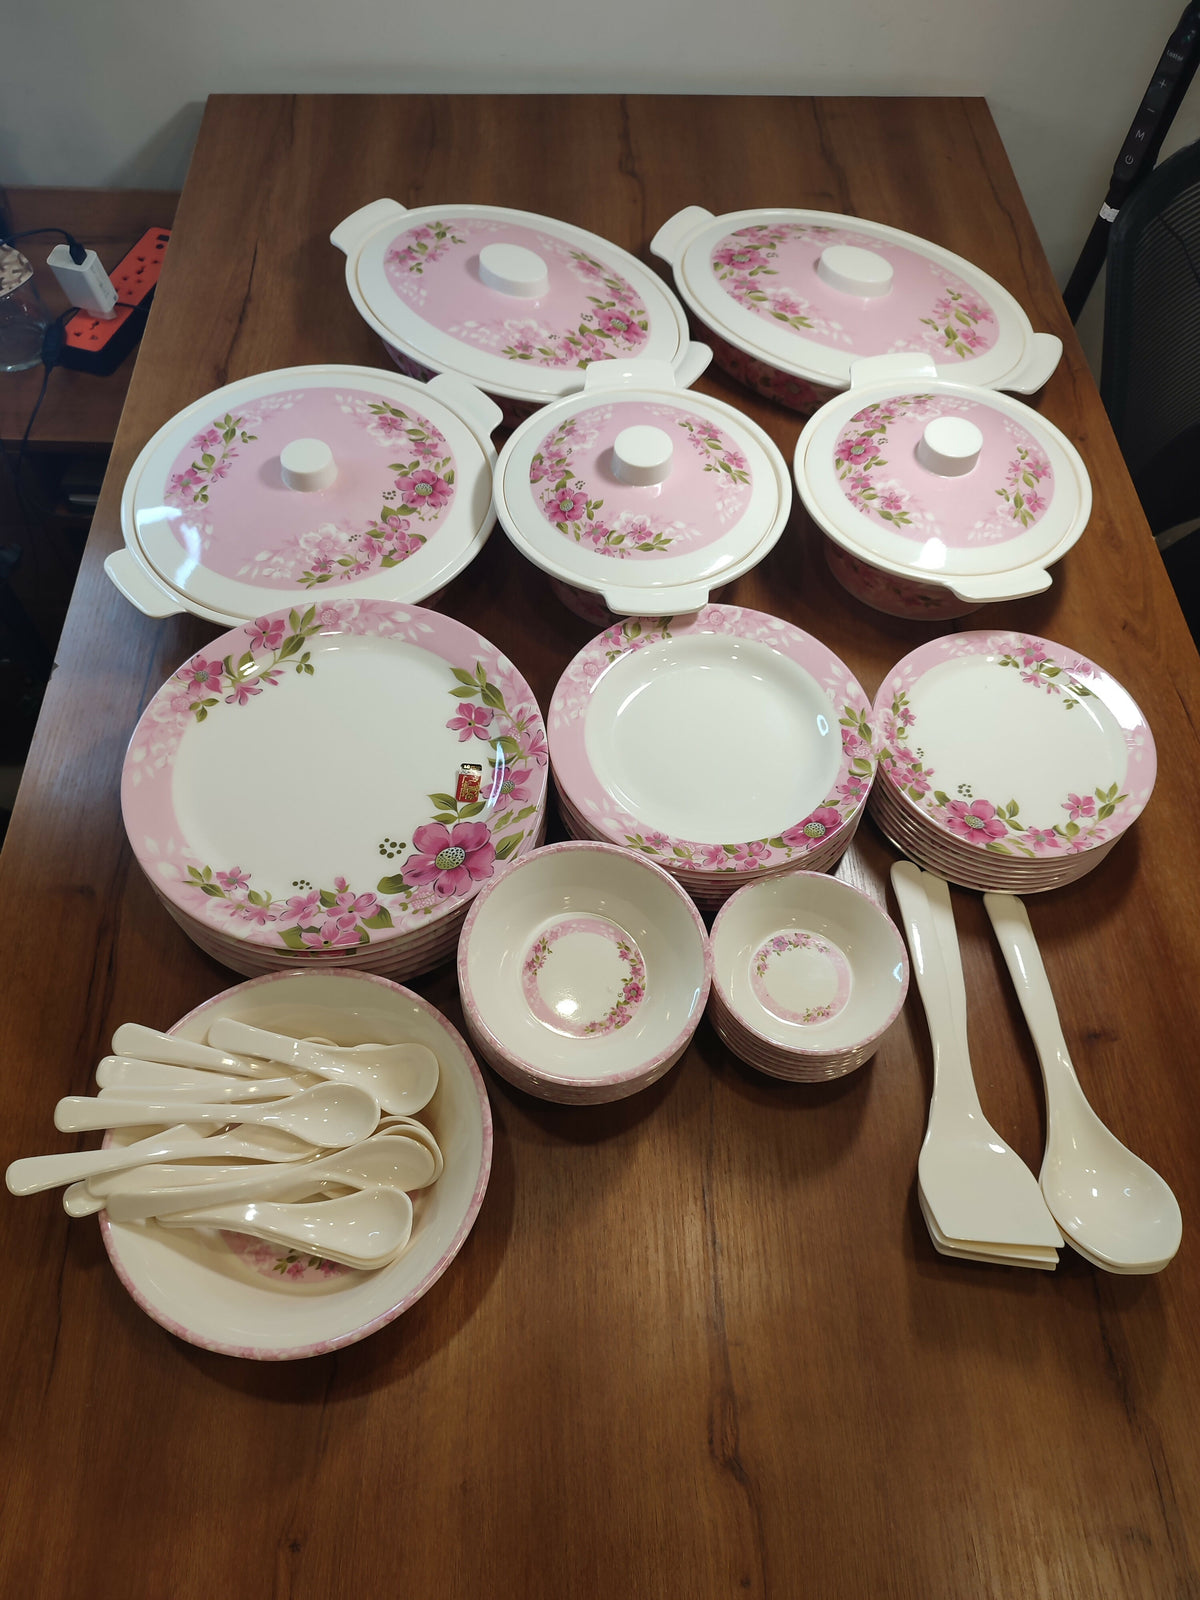 Melamine dinner set - 72 Service Dinner Set 8/8 persons serving Strong quality with good Looking I,11 - ValueBox